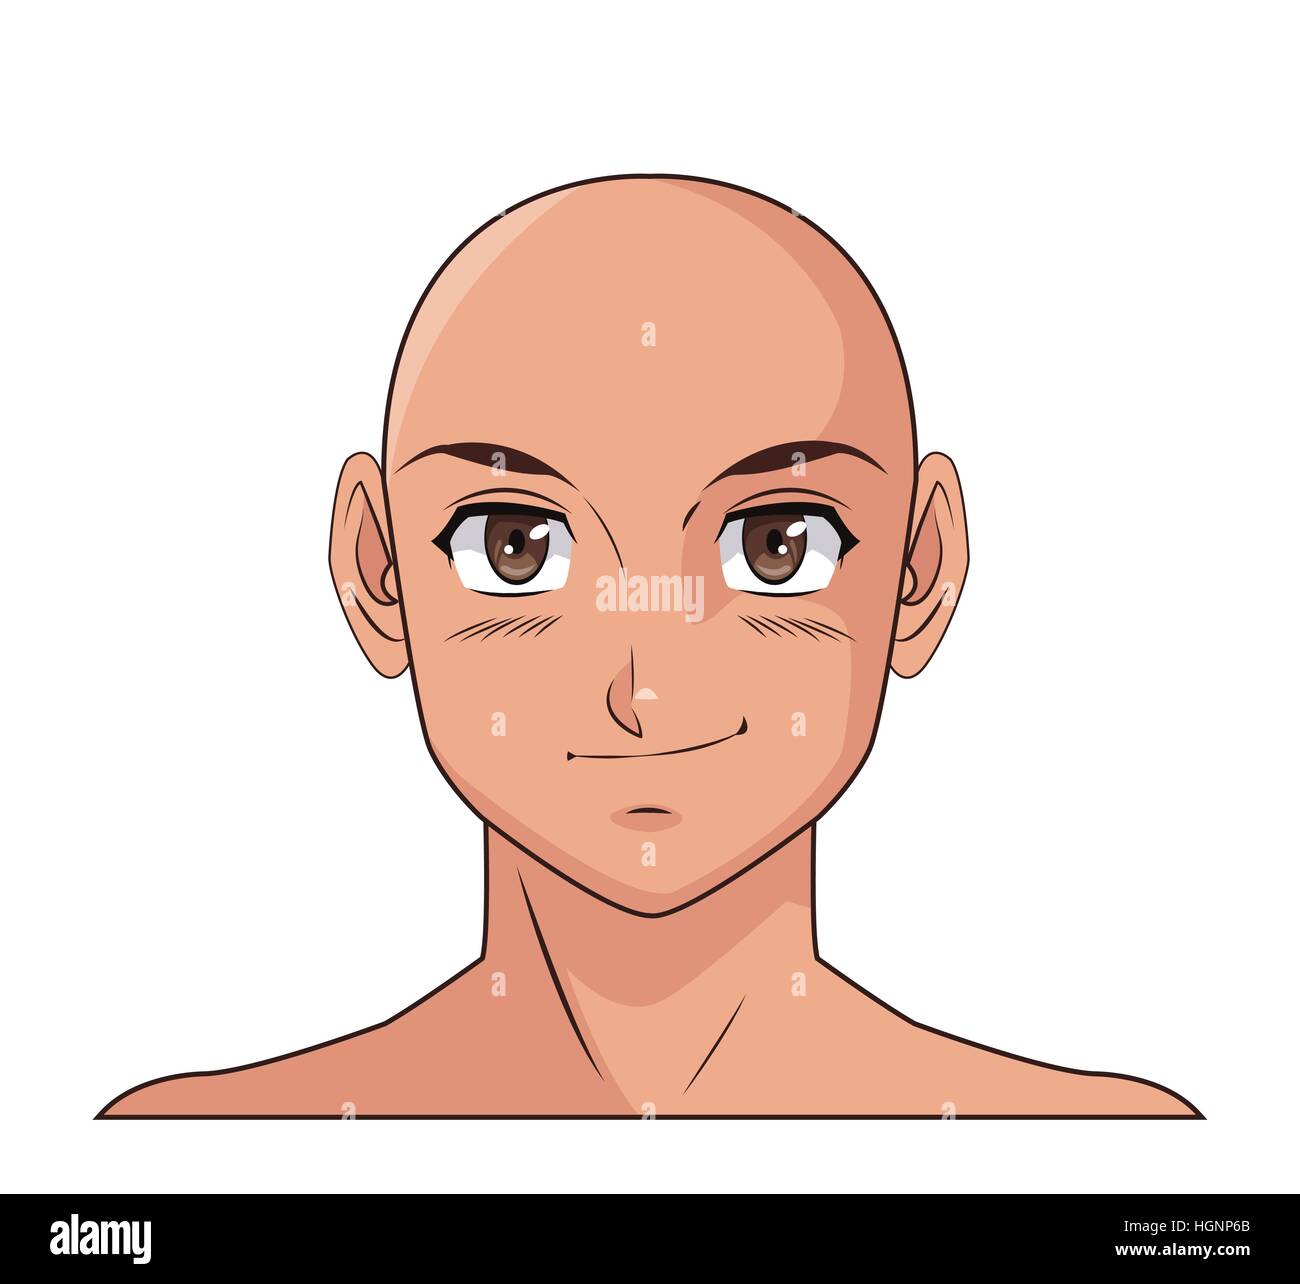 Top 10 Bald Anime Characters Best List